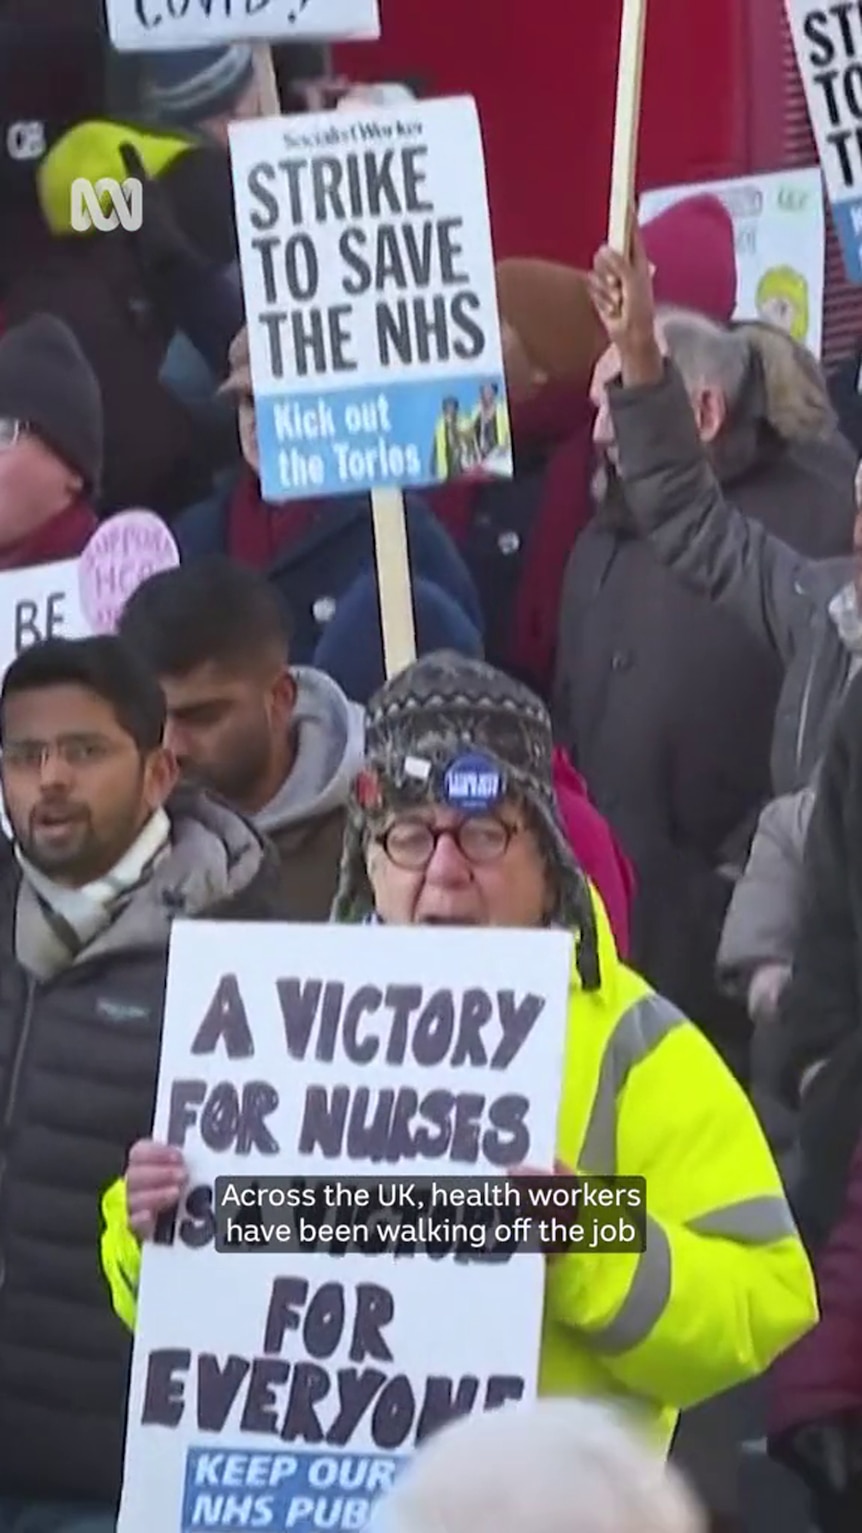 People hold placards with text such as: "strike to save the NHS" "A victory for nurses..."